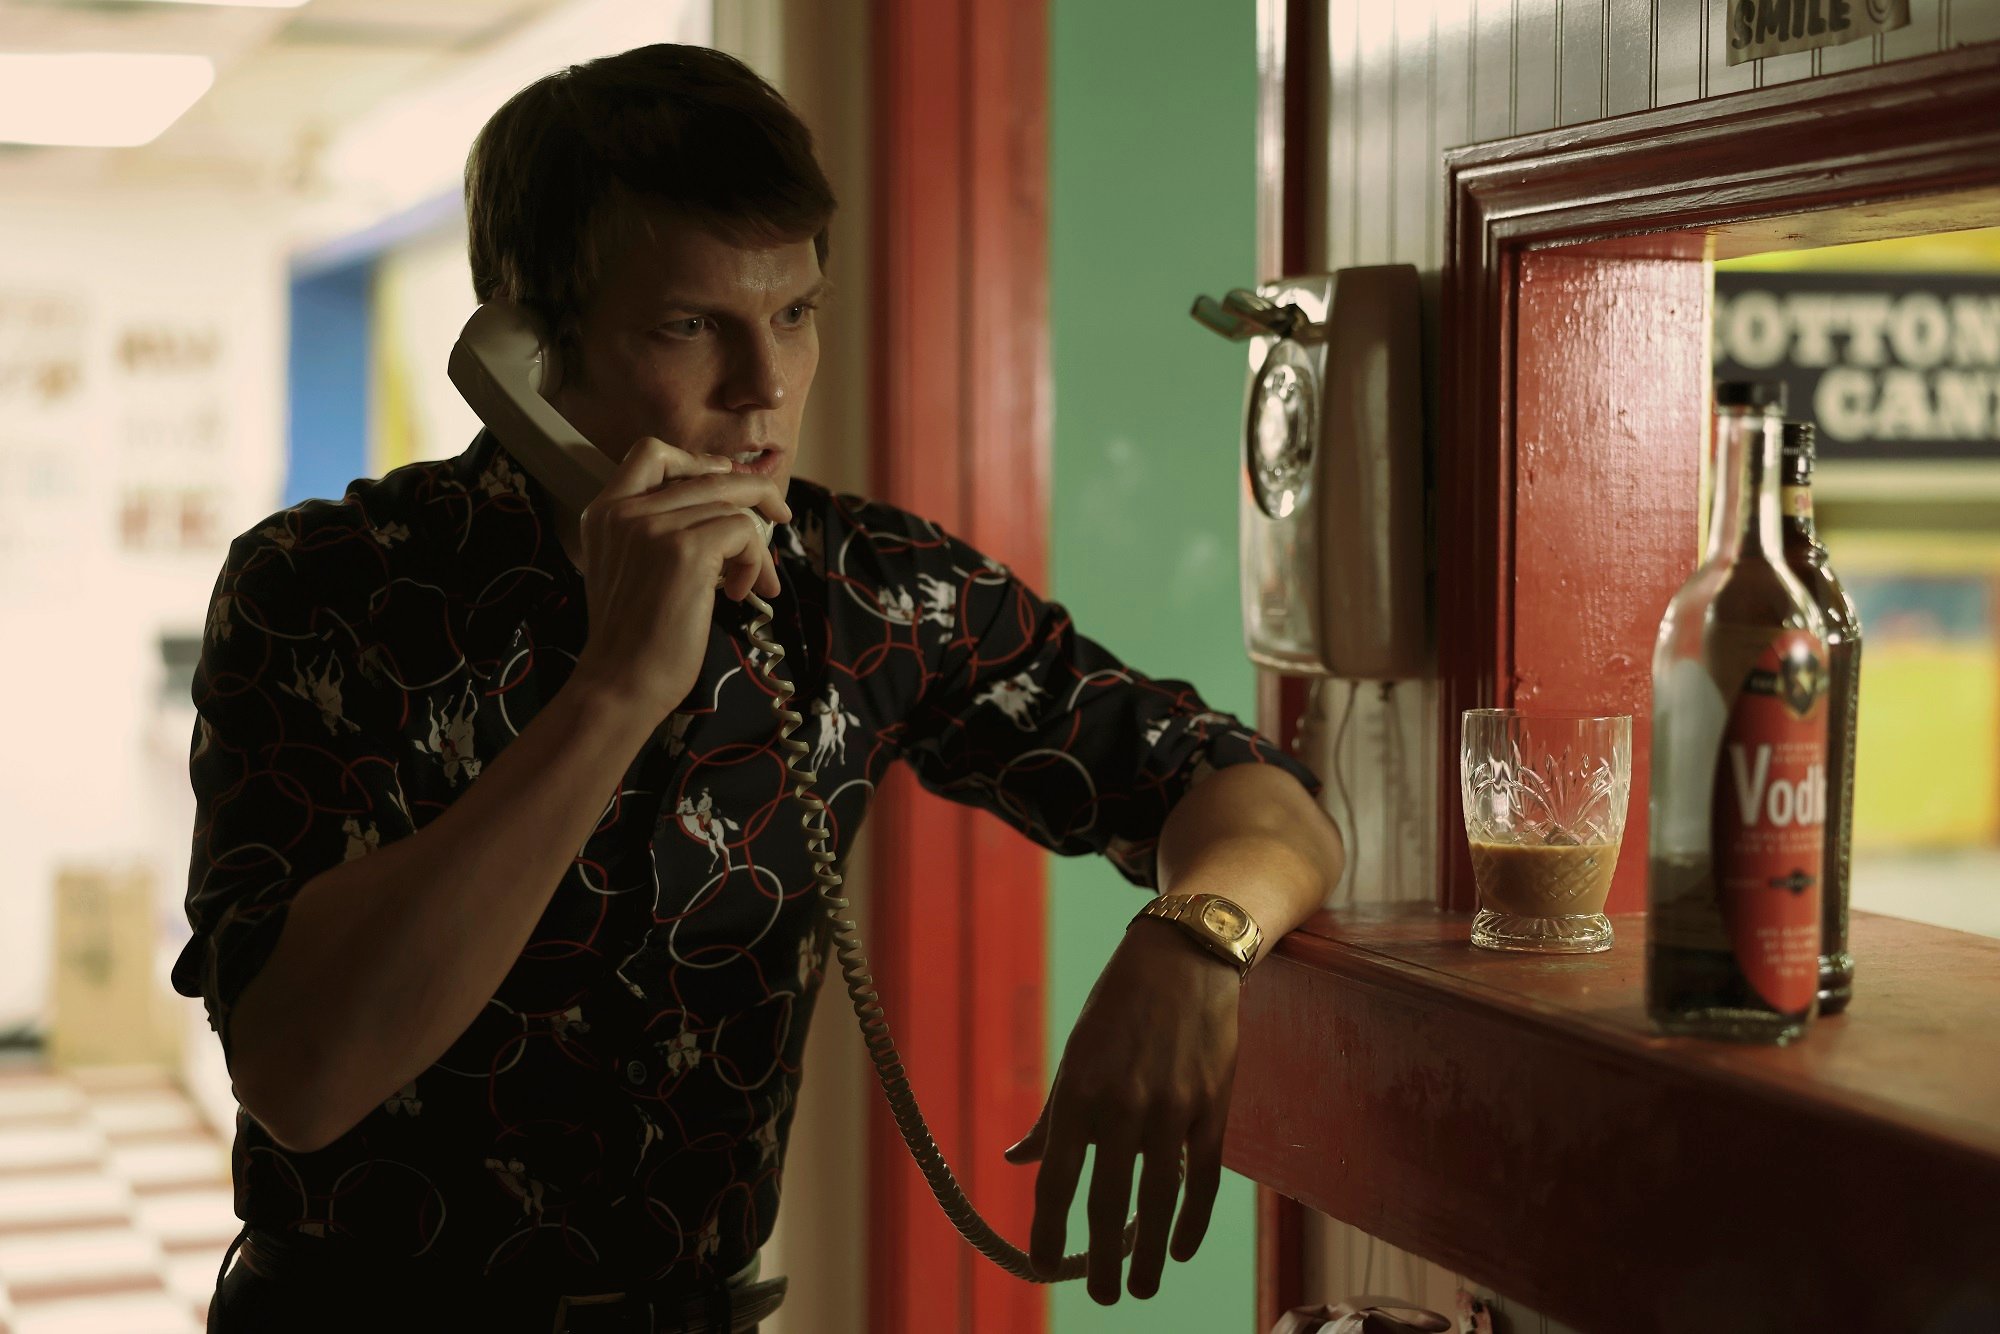 'A Friend of the Family' cast member Jake Lacy on the phone as Robert Berchtold